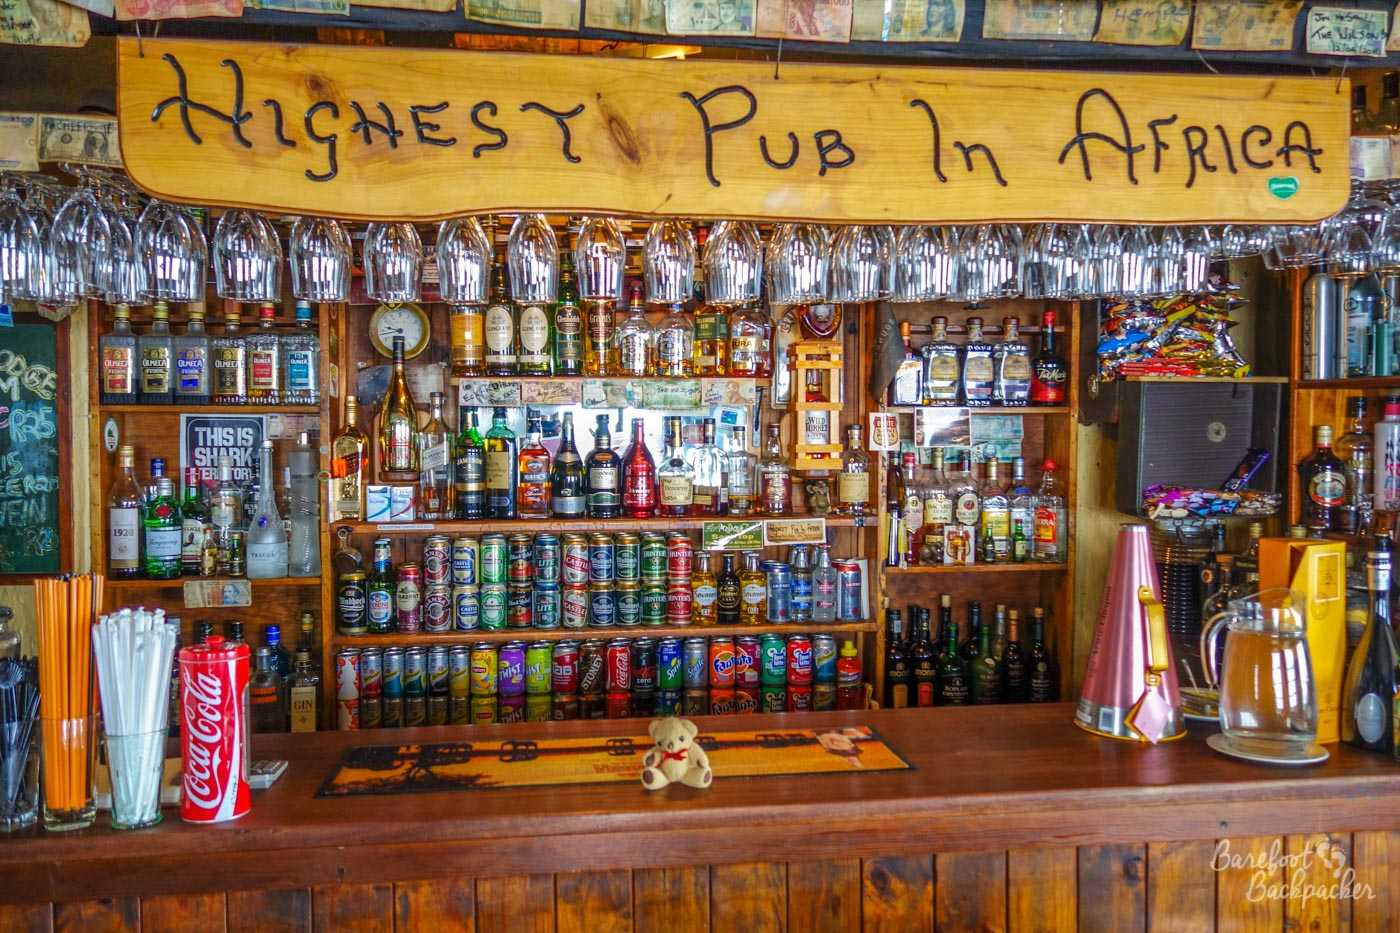 Unable to go for a hike, Baby Ian sits by the bar at the Highest Pub in Africa, in the Sani Pass Lodge, Lesotho